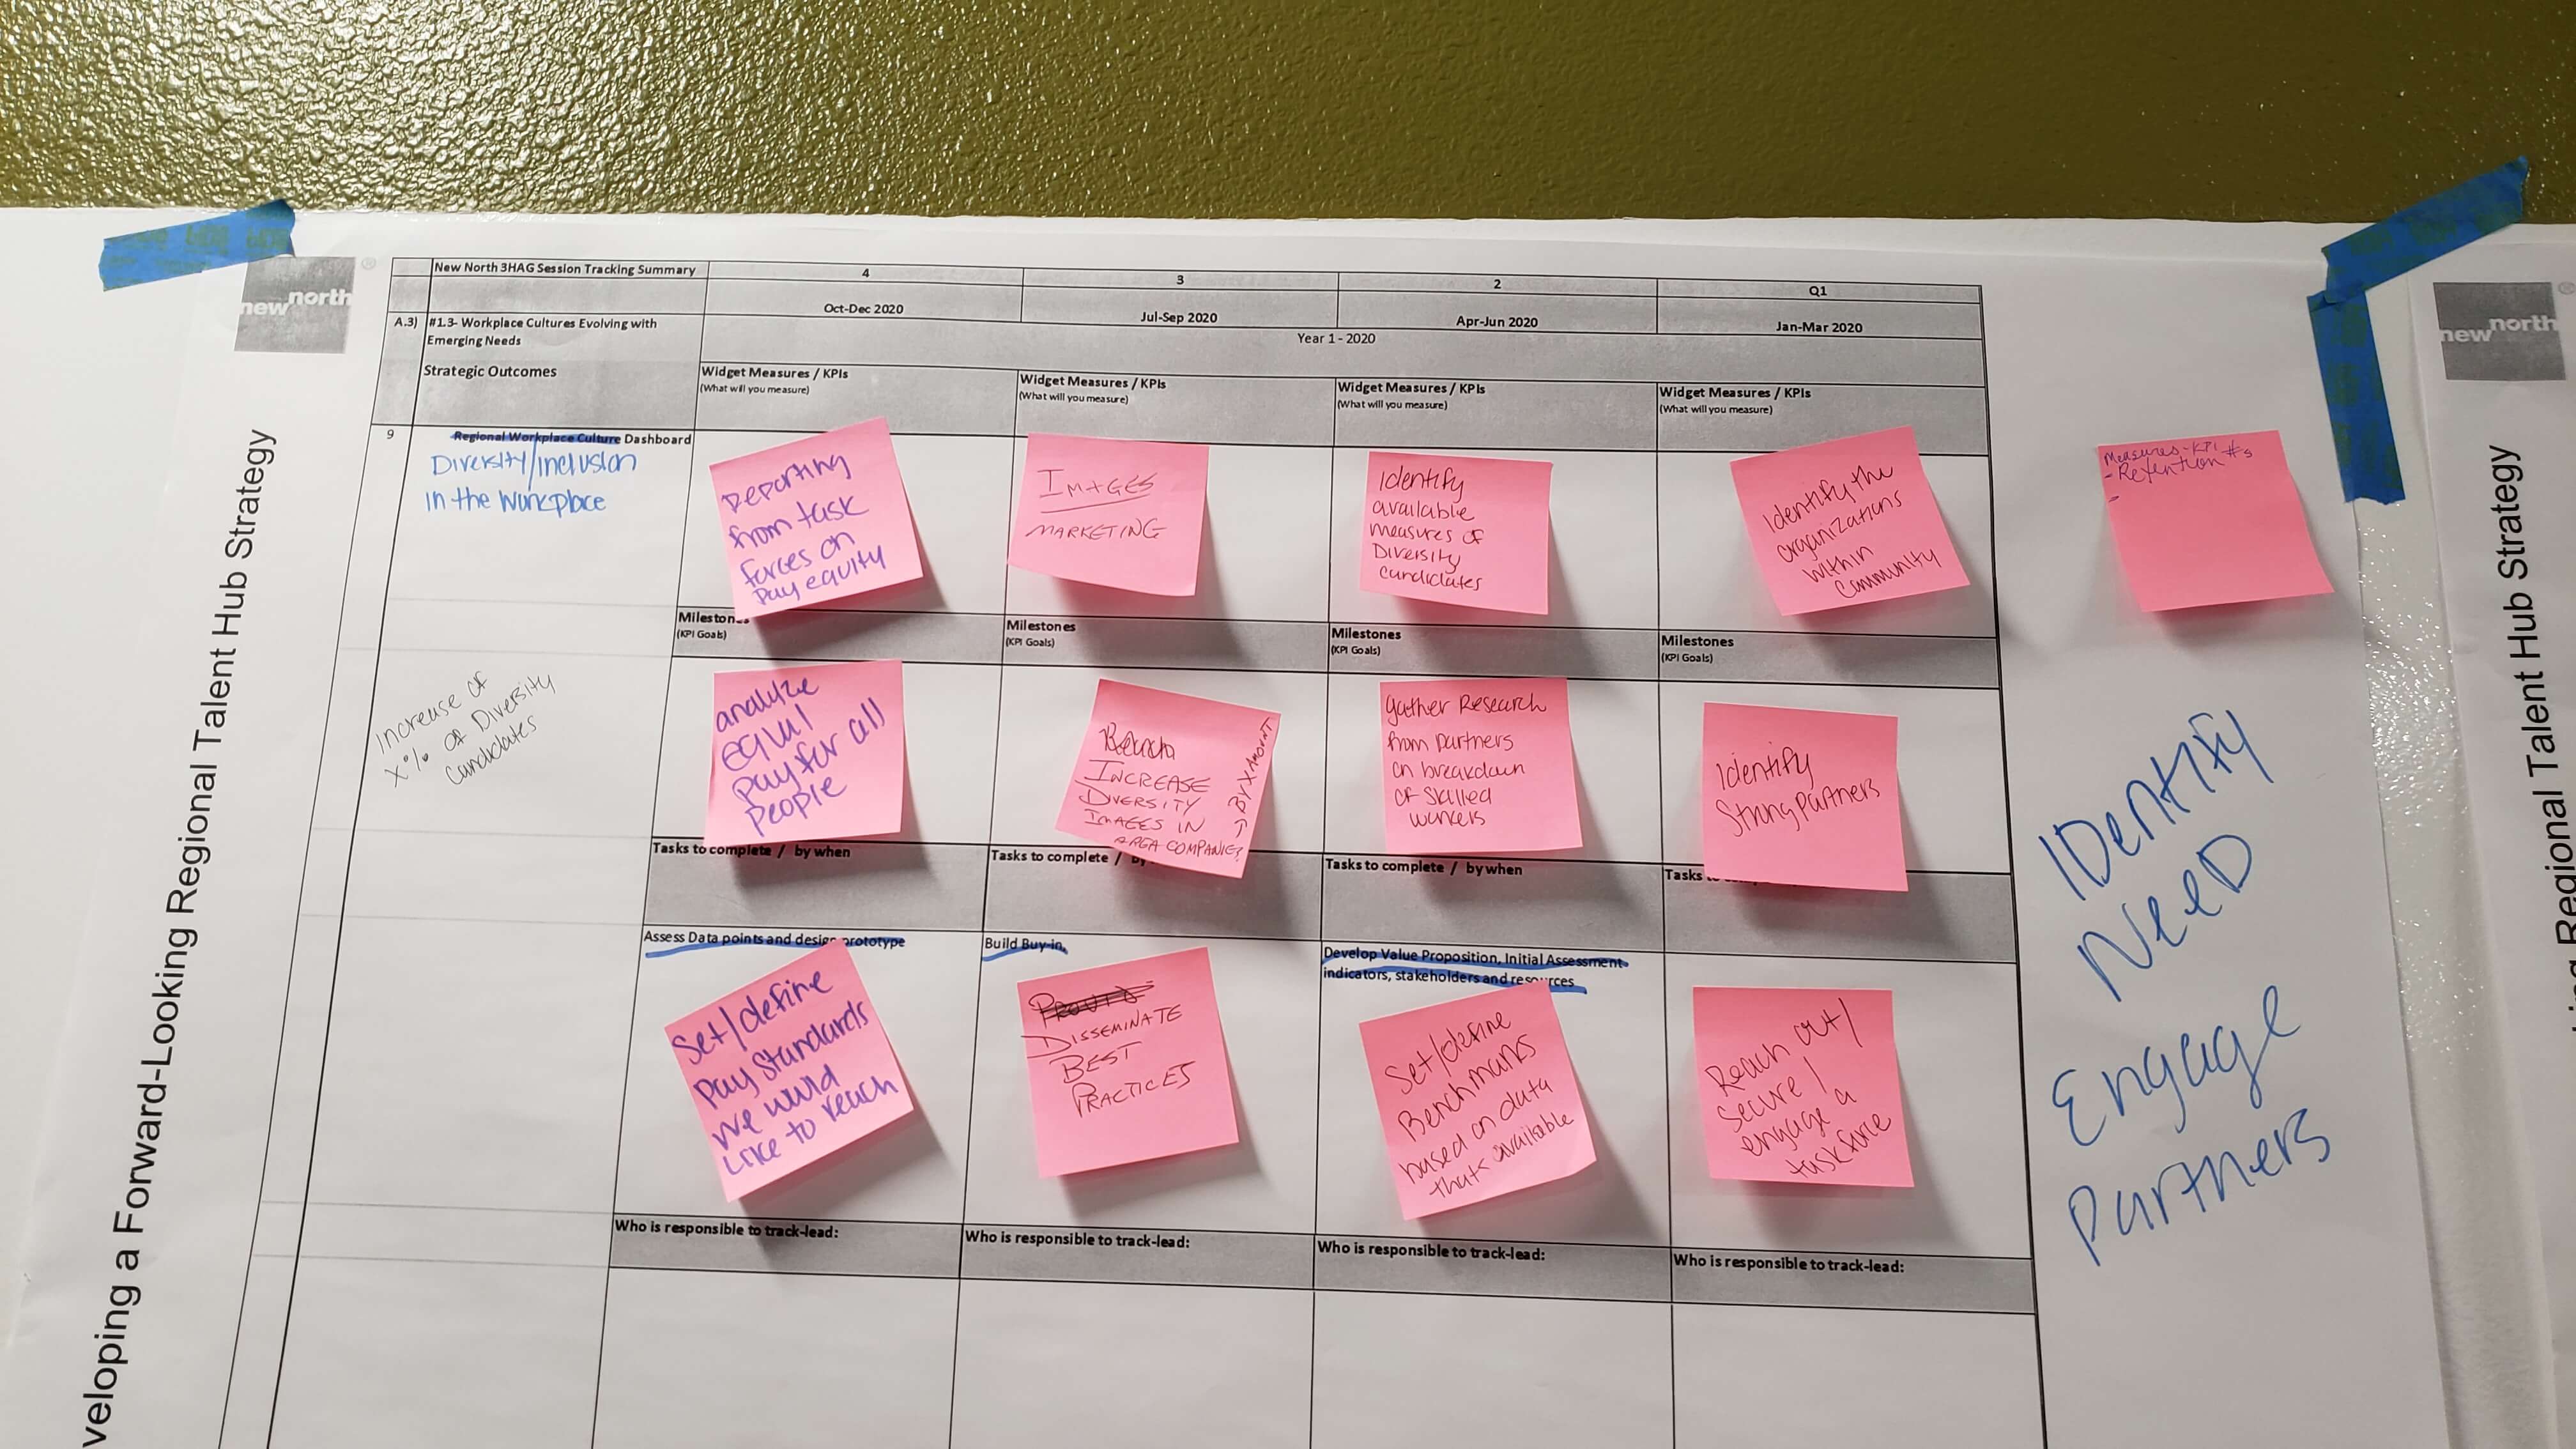 Whiteboard with pink sticky notes in three rows